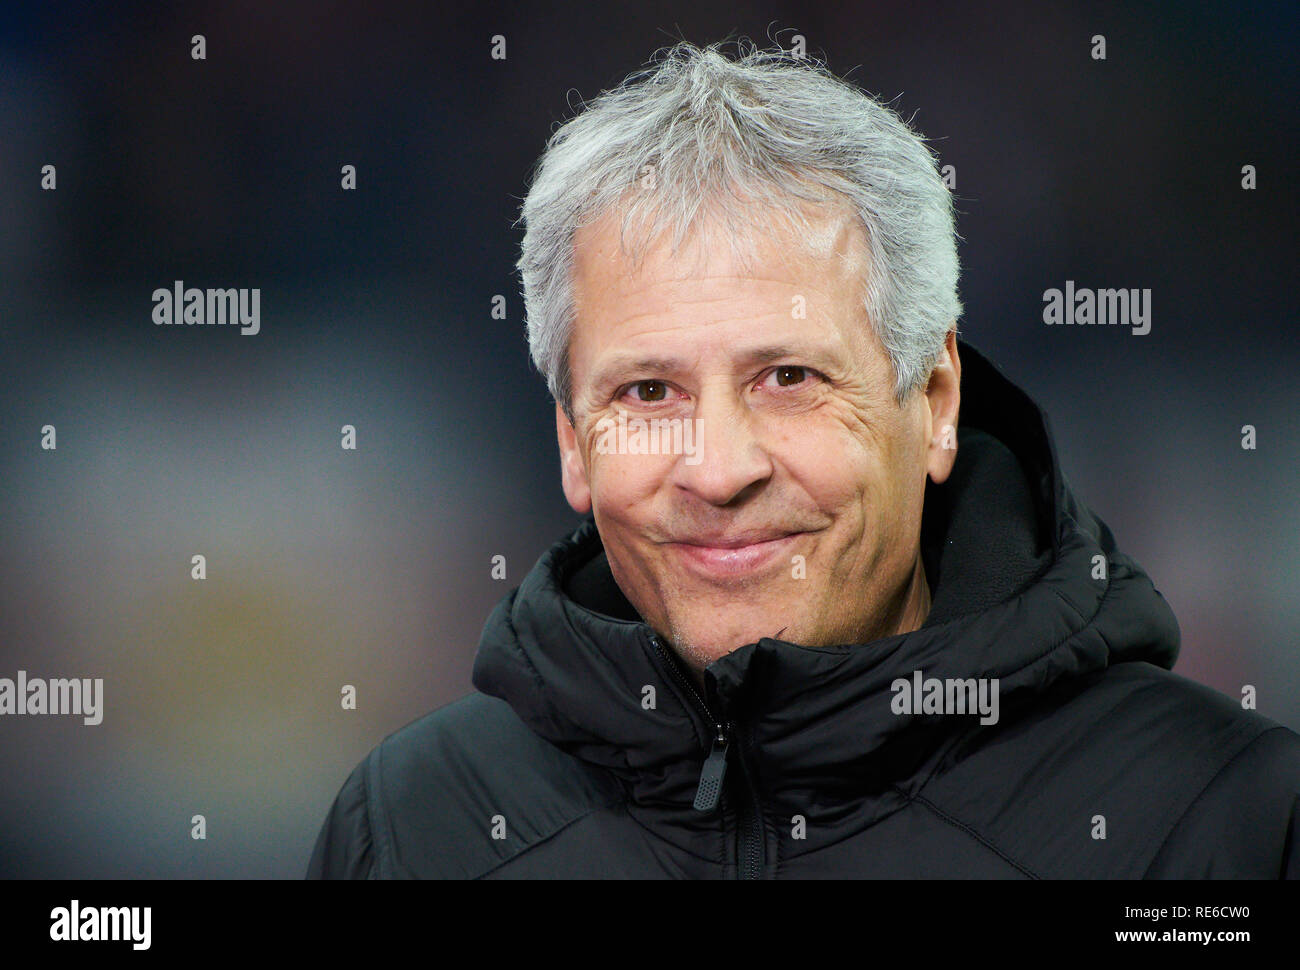 Leipzig, Germany. 19th Jan 2019. Lucien FAVRE, Chef - Trainer BVB  half-size, portrait, RB LEIPZIG - BORUSSIA DORTMUND 0-1 - DFL REGULATIONS  PROHIBIT ANY USE OF PHOTOGRAPHS as IMAGE SEQUENCES and/or QUASI-VIDEO -